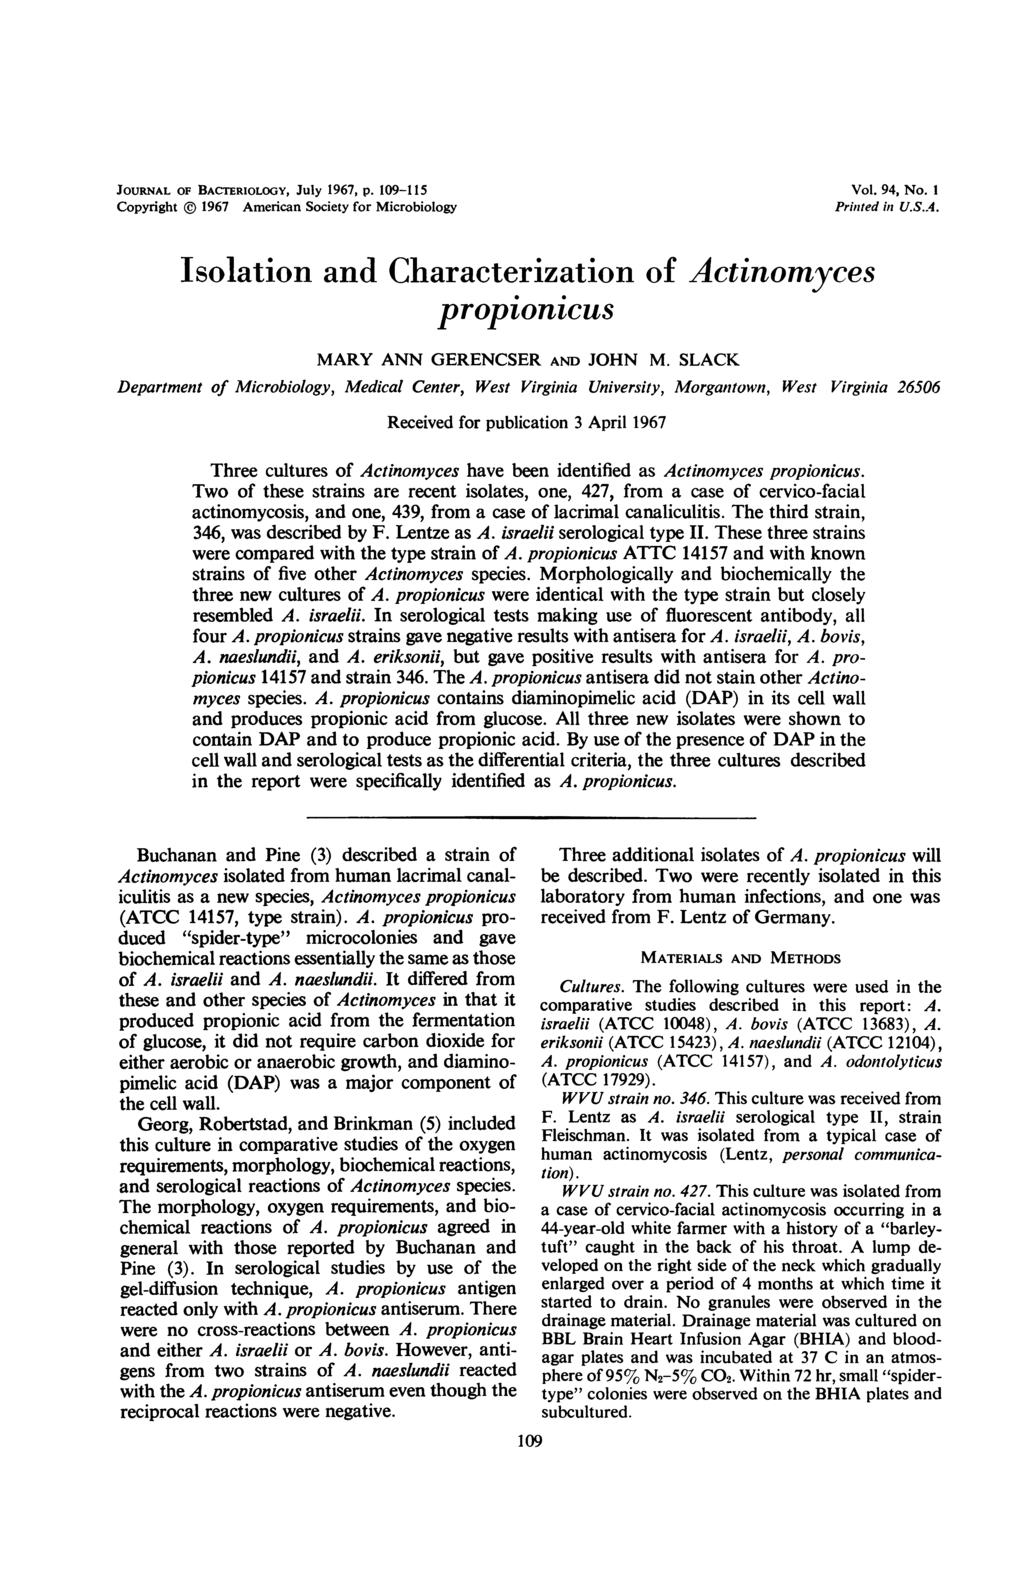 JOURNAL OF BACTERIOLOGY, July 1967, p. 109-115 Copyright 1967 American Society for Microbiology Vol. 94, No. 1 Printed in U.S.A. Isolation and Characterization of Actinomyces propionicus MARY ANN GERENCSER AND JOHN M.